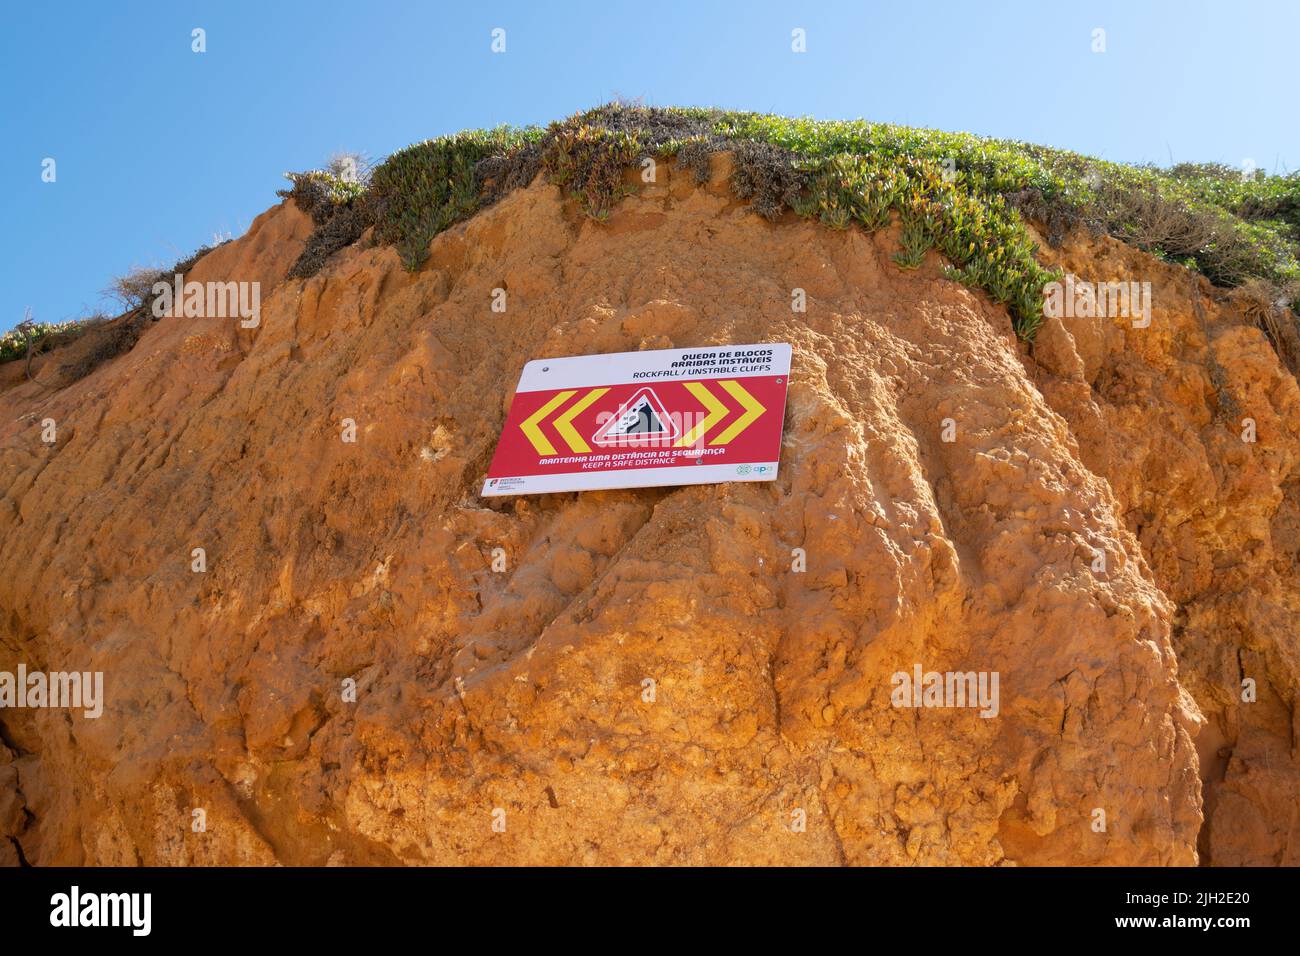 Cliffs rockfall signs in Algarve Portugal. Beach cliffs, rockfall zone on coastal beaches. Dangerous areas on beaches under cliffs. Cliff collapsing zone Stock Photo